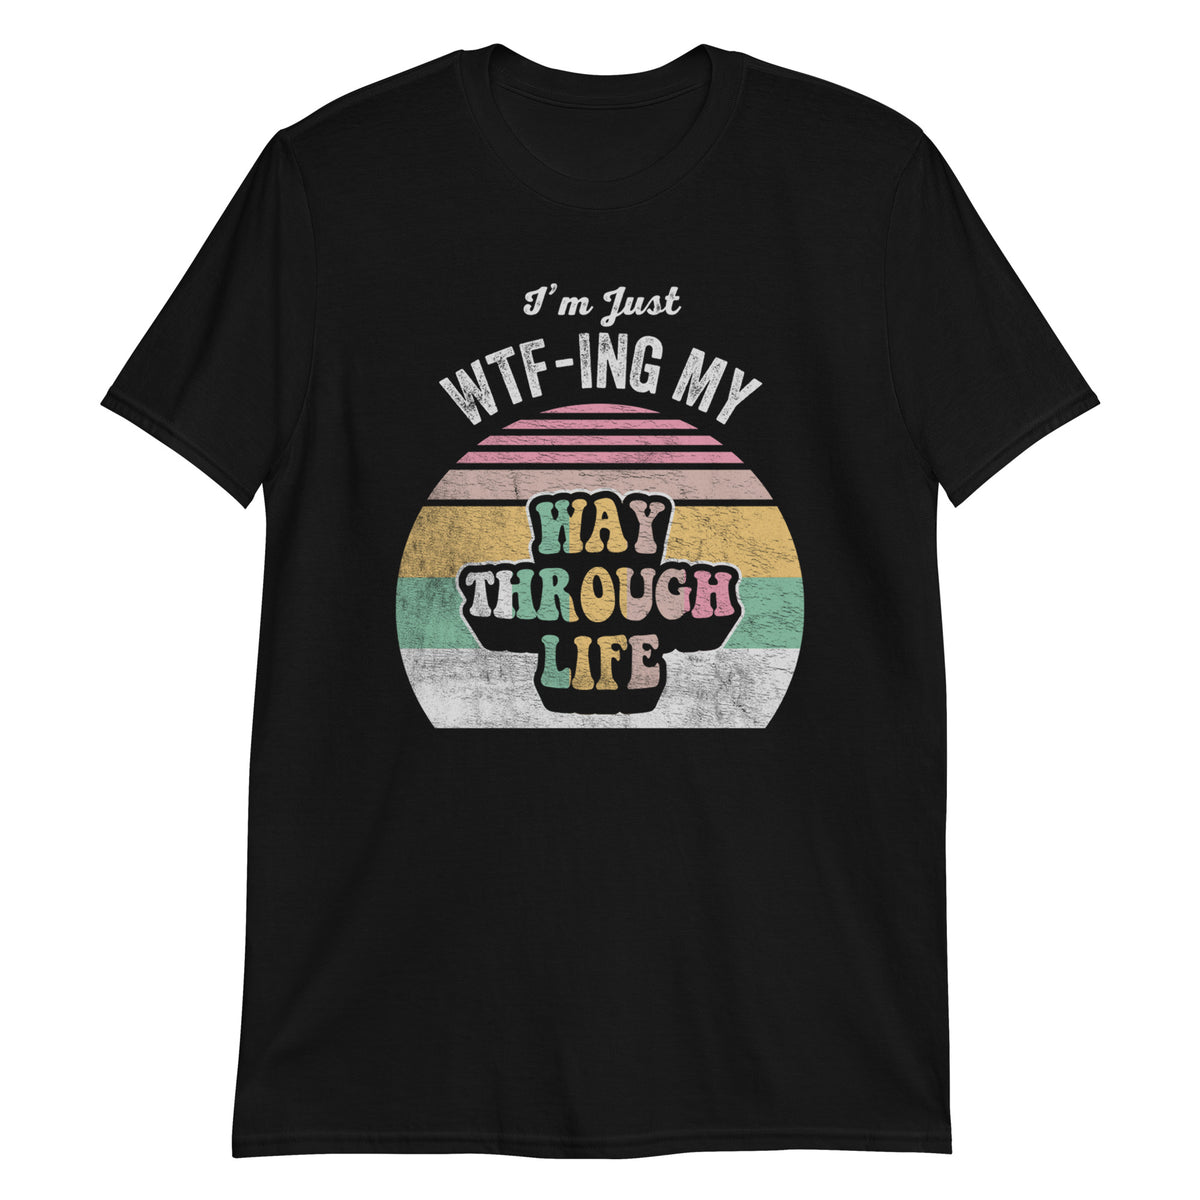 I'm Just WTFing My Way Through Life Funny Saying Sarcastic Retro Vintage T-Shirt